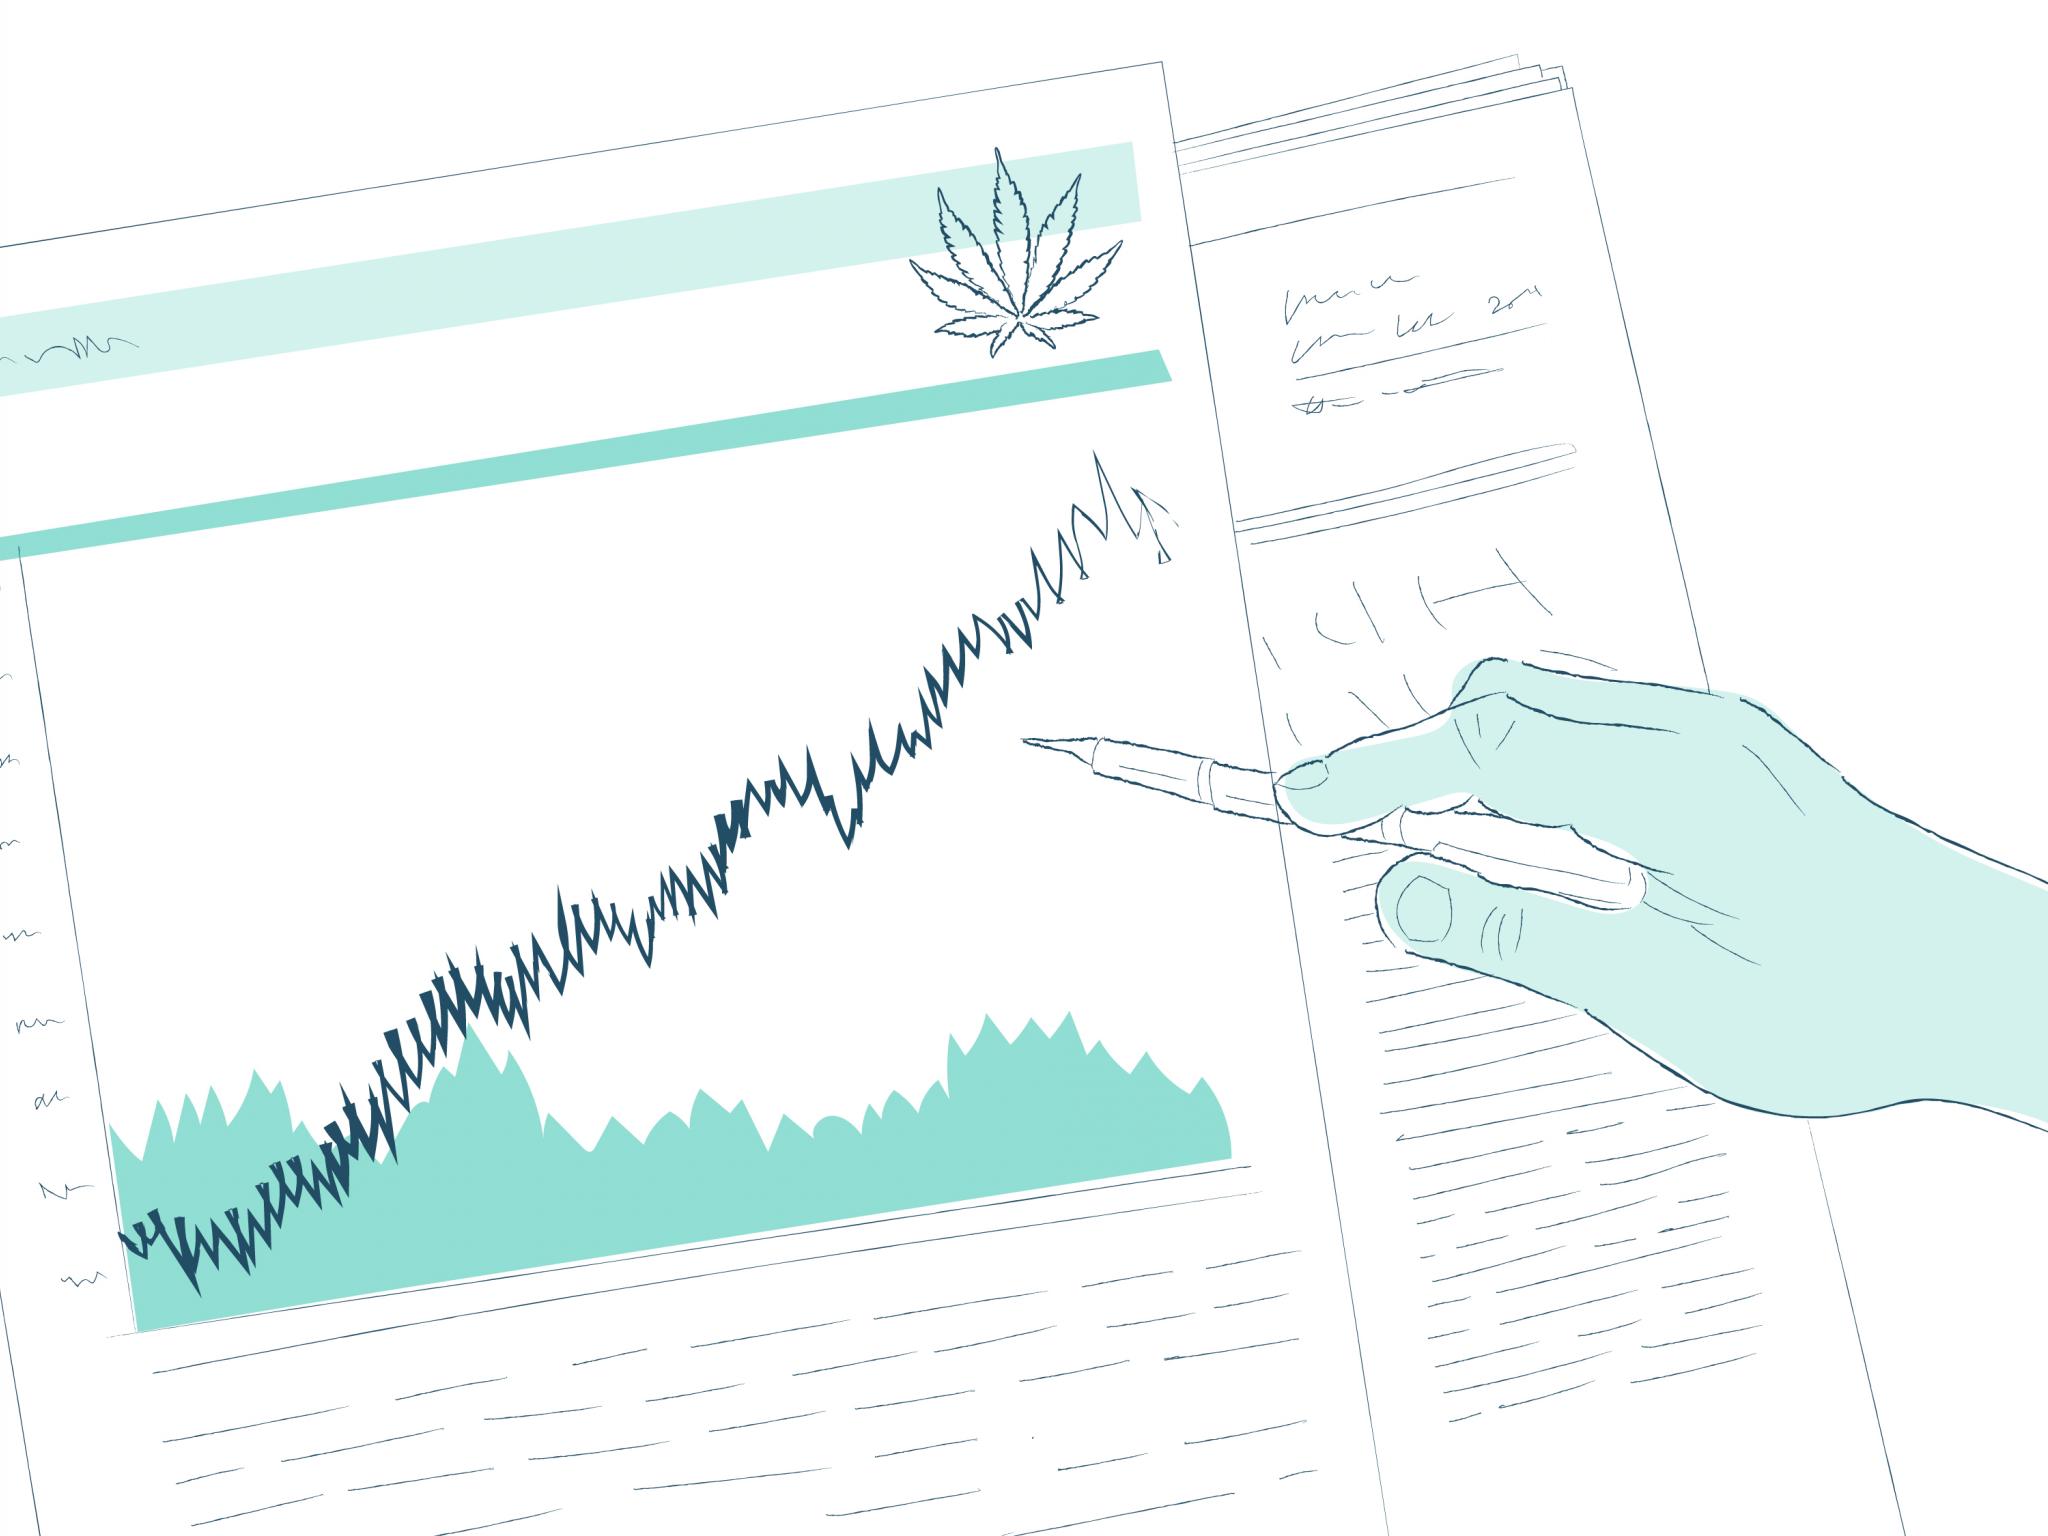  cannabis-stock-gainers-and-losers-from-april-8-2021 